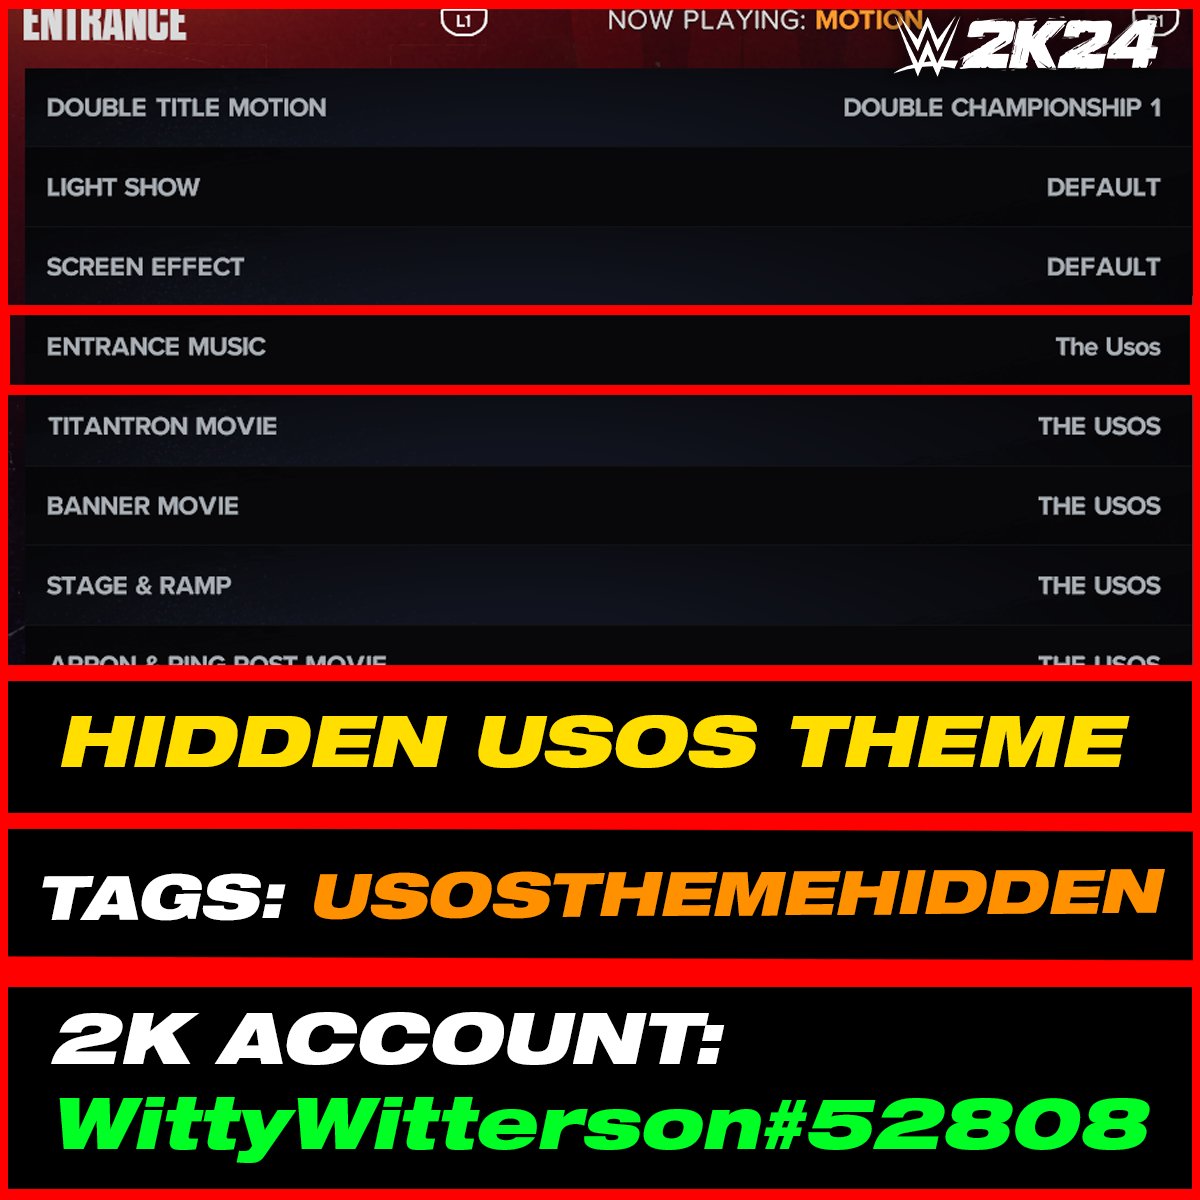 Hidden Usos Theme is uploaded onto Community Creations #WWE2K24 

•Hashtags are: USOSTHEMEHIDDEN, WITTY226, TheUsos

INCLUDES:
• Hidden Theme Song

• Can copy onto other CAWs